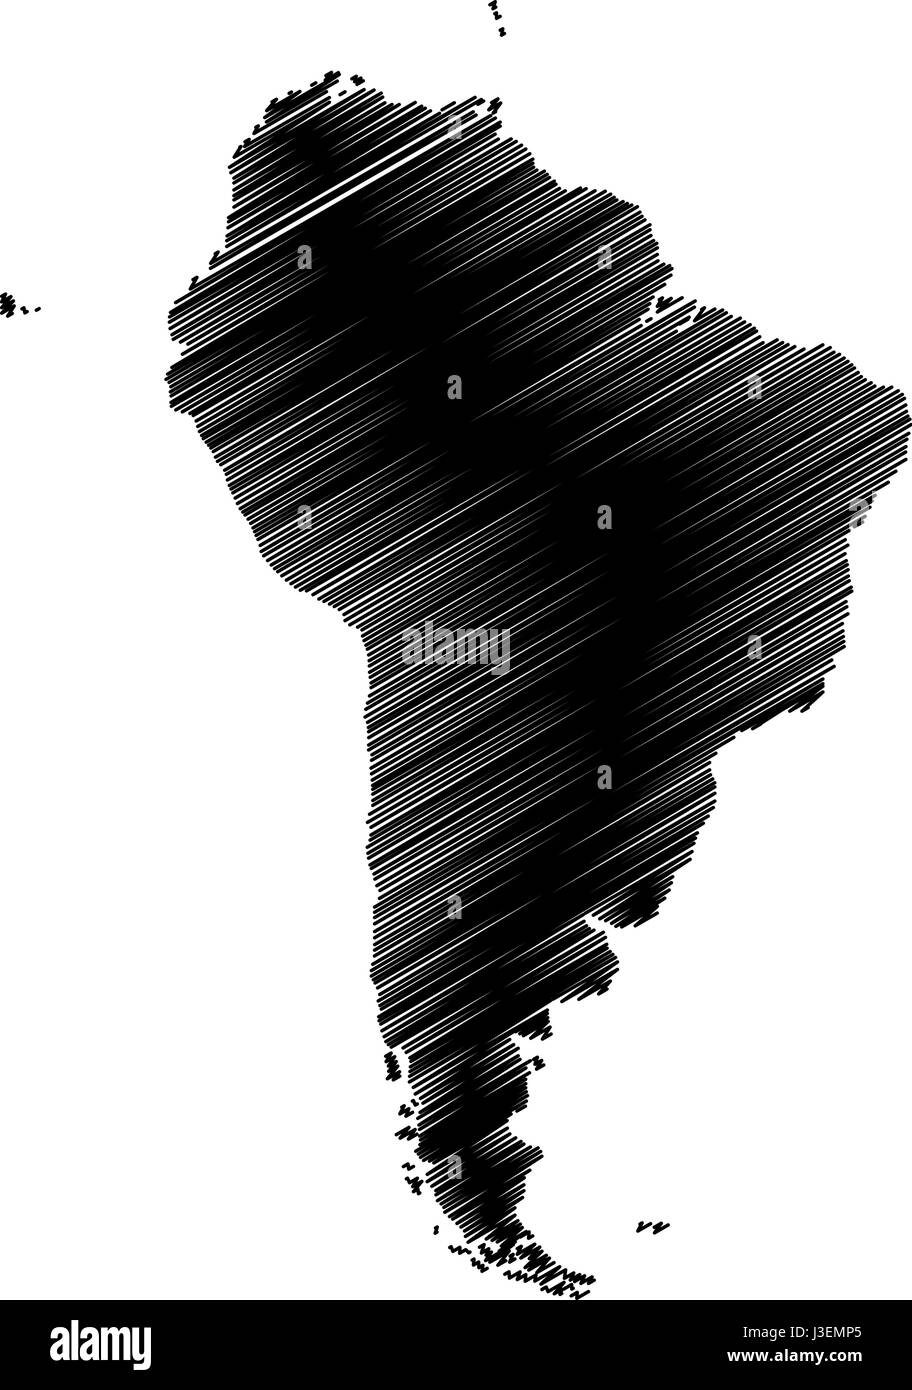 Map of South America vector illustration, Stock Vector